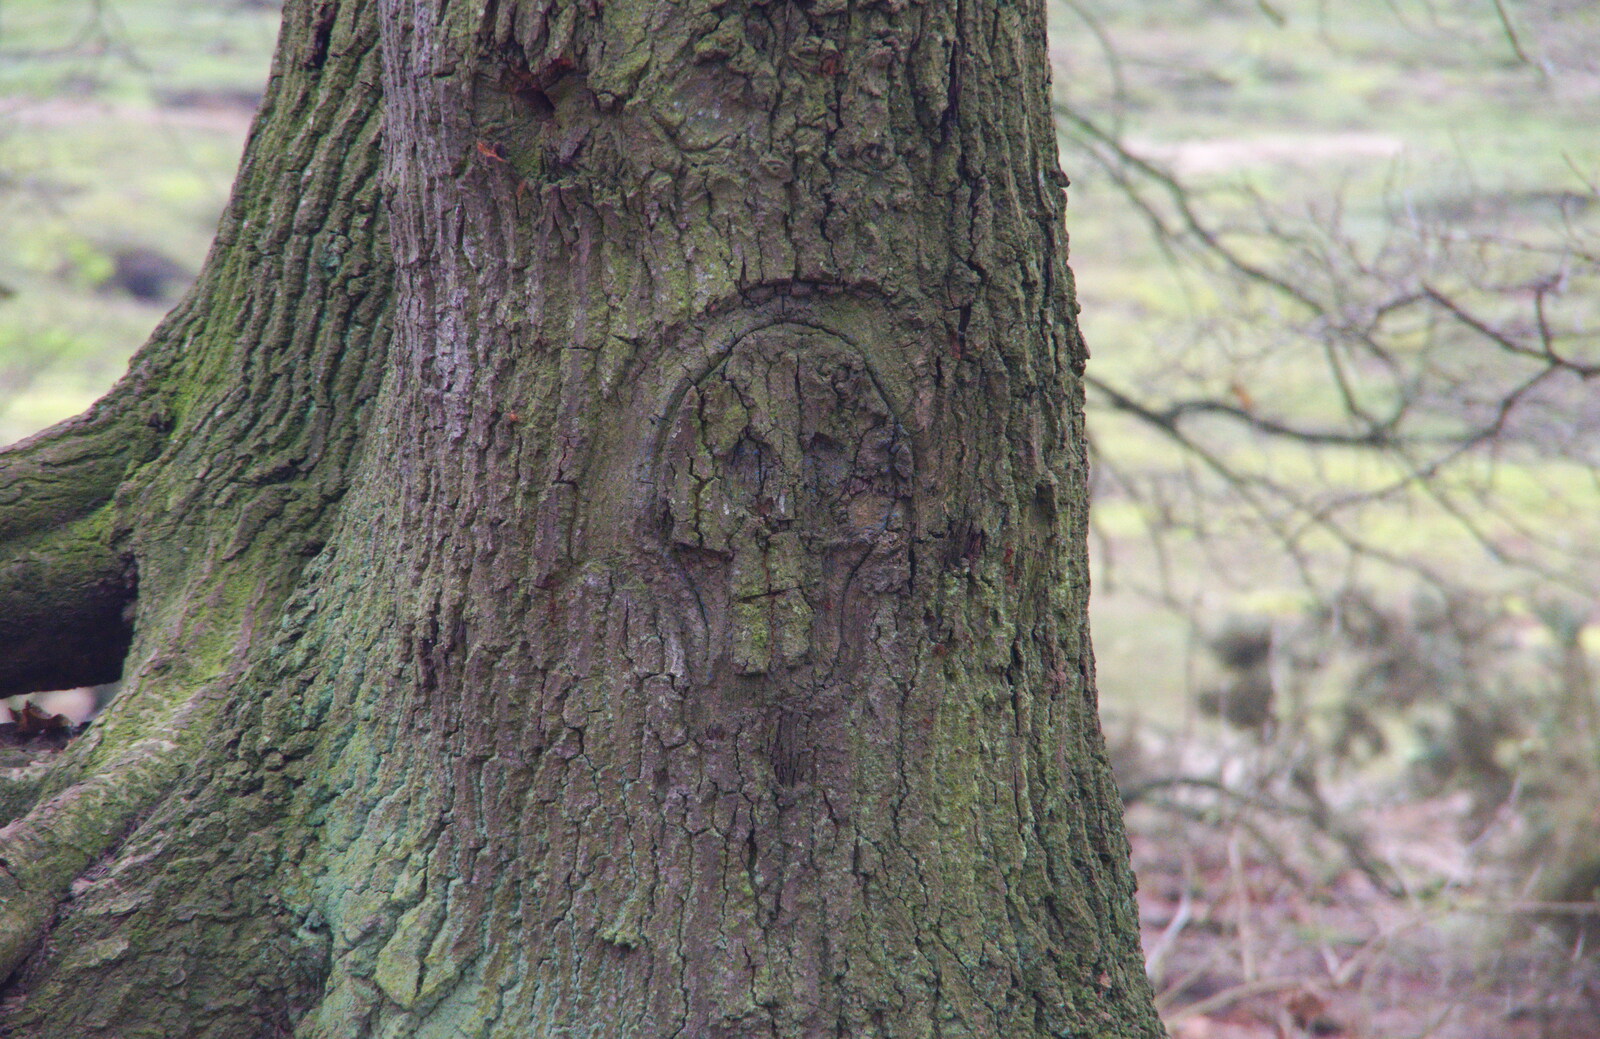 A skull has been carved into the tree bark from New Year's Day on the Ling, Wortham, Suffolk - 1st January 2020